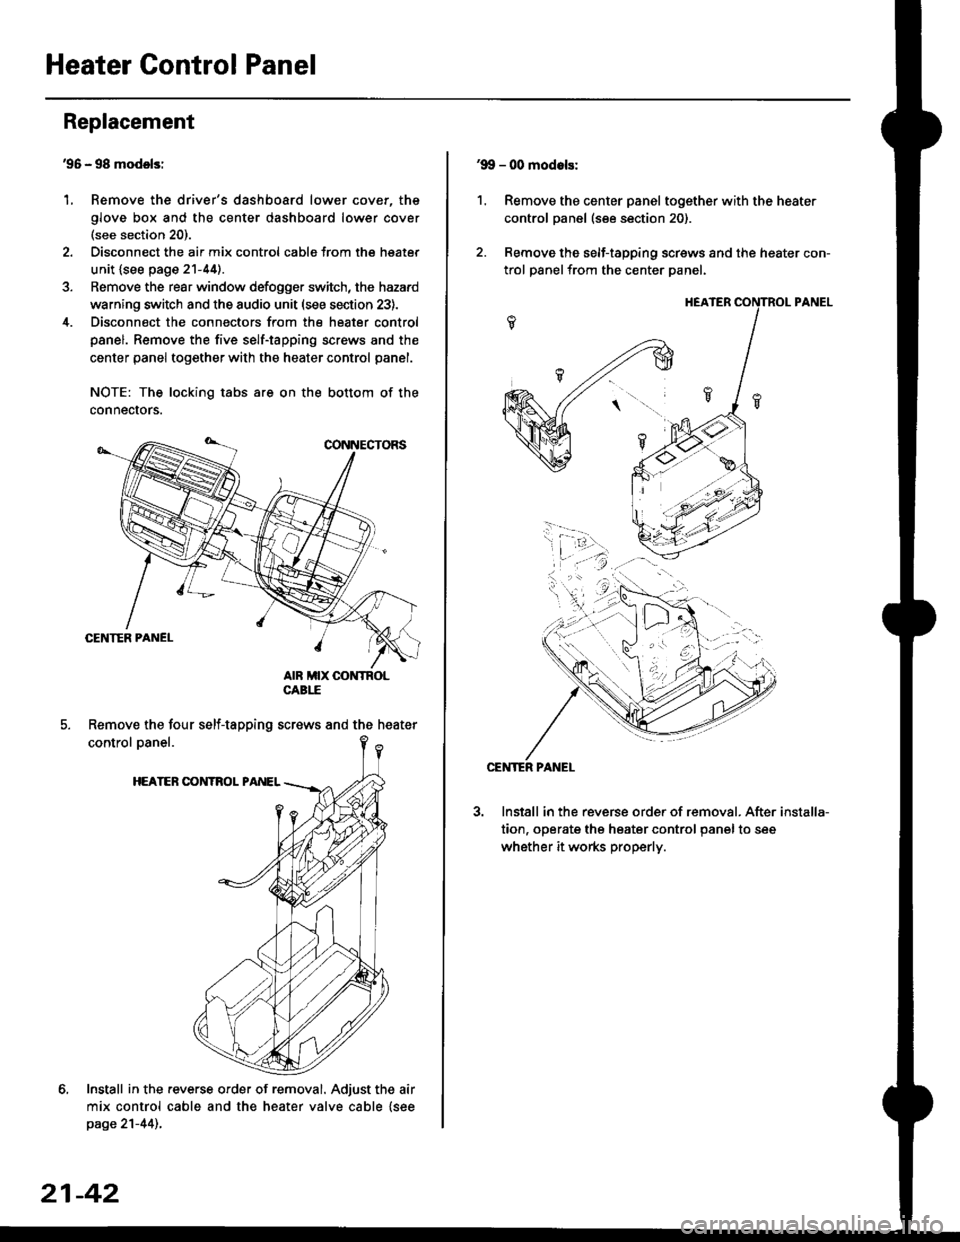 HONDA CIVIC 2000 6.G Workshop Manual Heater Control Panel
95 - 98 modolsi
Remove the drivers dashboard lower cover, the
glove box and the center dashboard lower cover(see section 20).
Disconnect the air mix control cabls from the heate